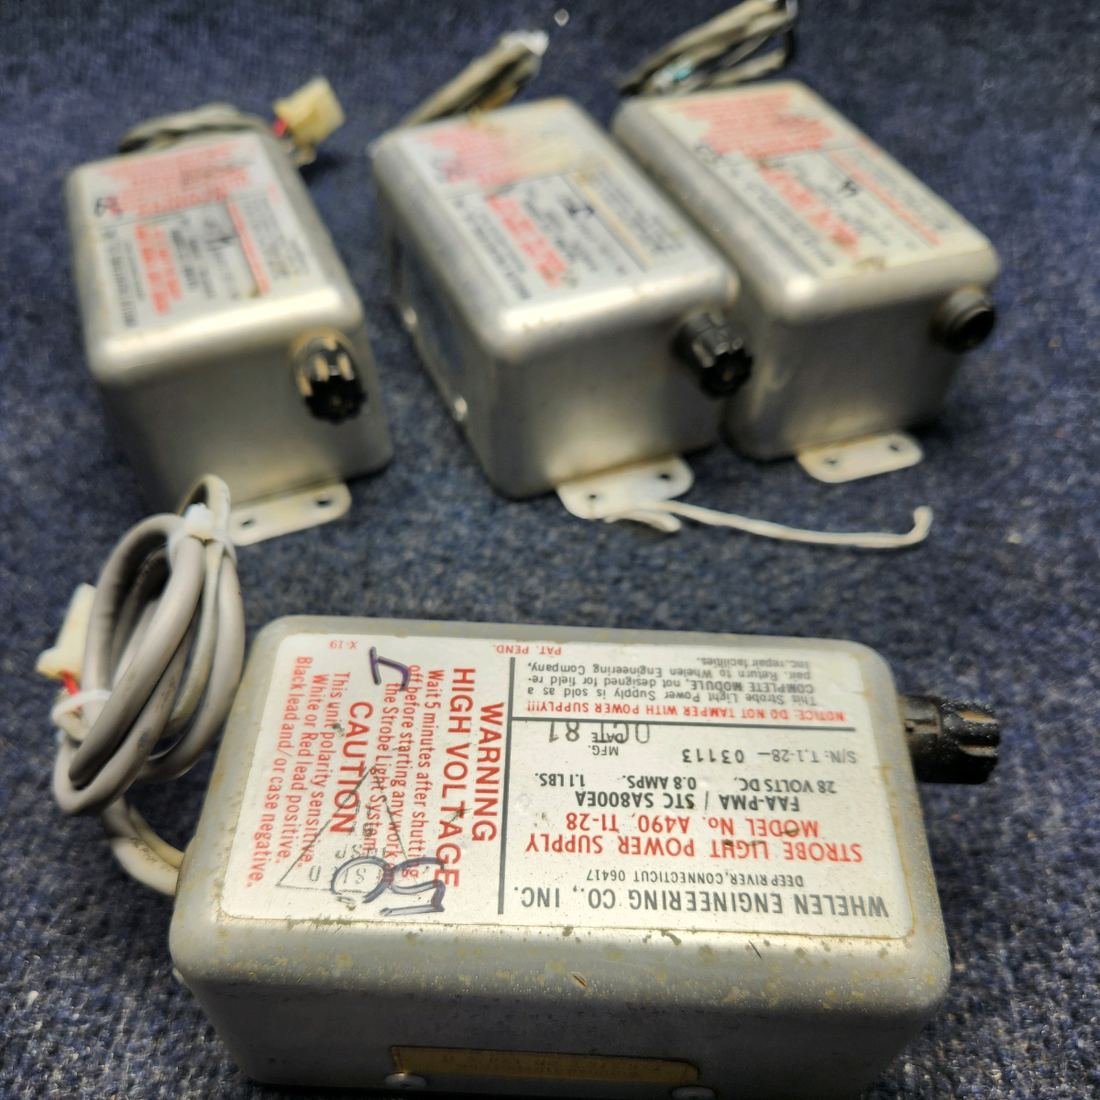 Used aircraft parts for sale, A490, T1-28 Whelen Strobe Power Supply WHELEN STROBE LIGHT POWER SUPPLY "FOR PARTS ONLY" 28VOLTS